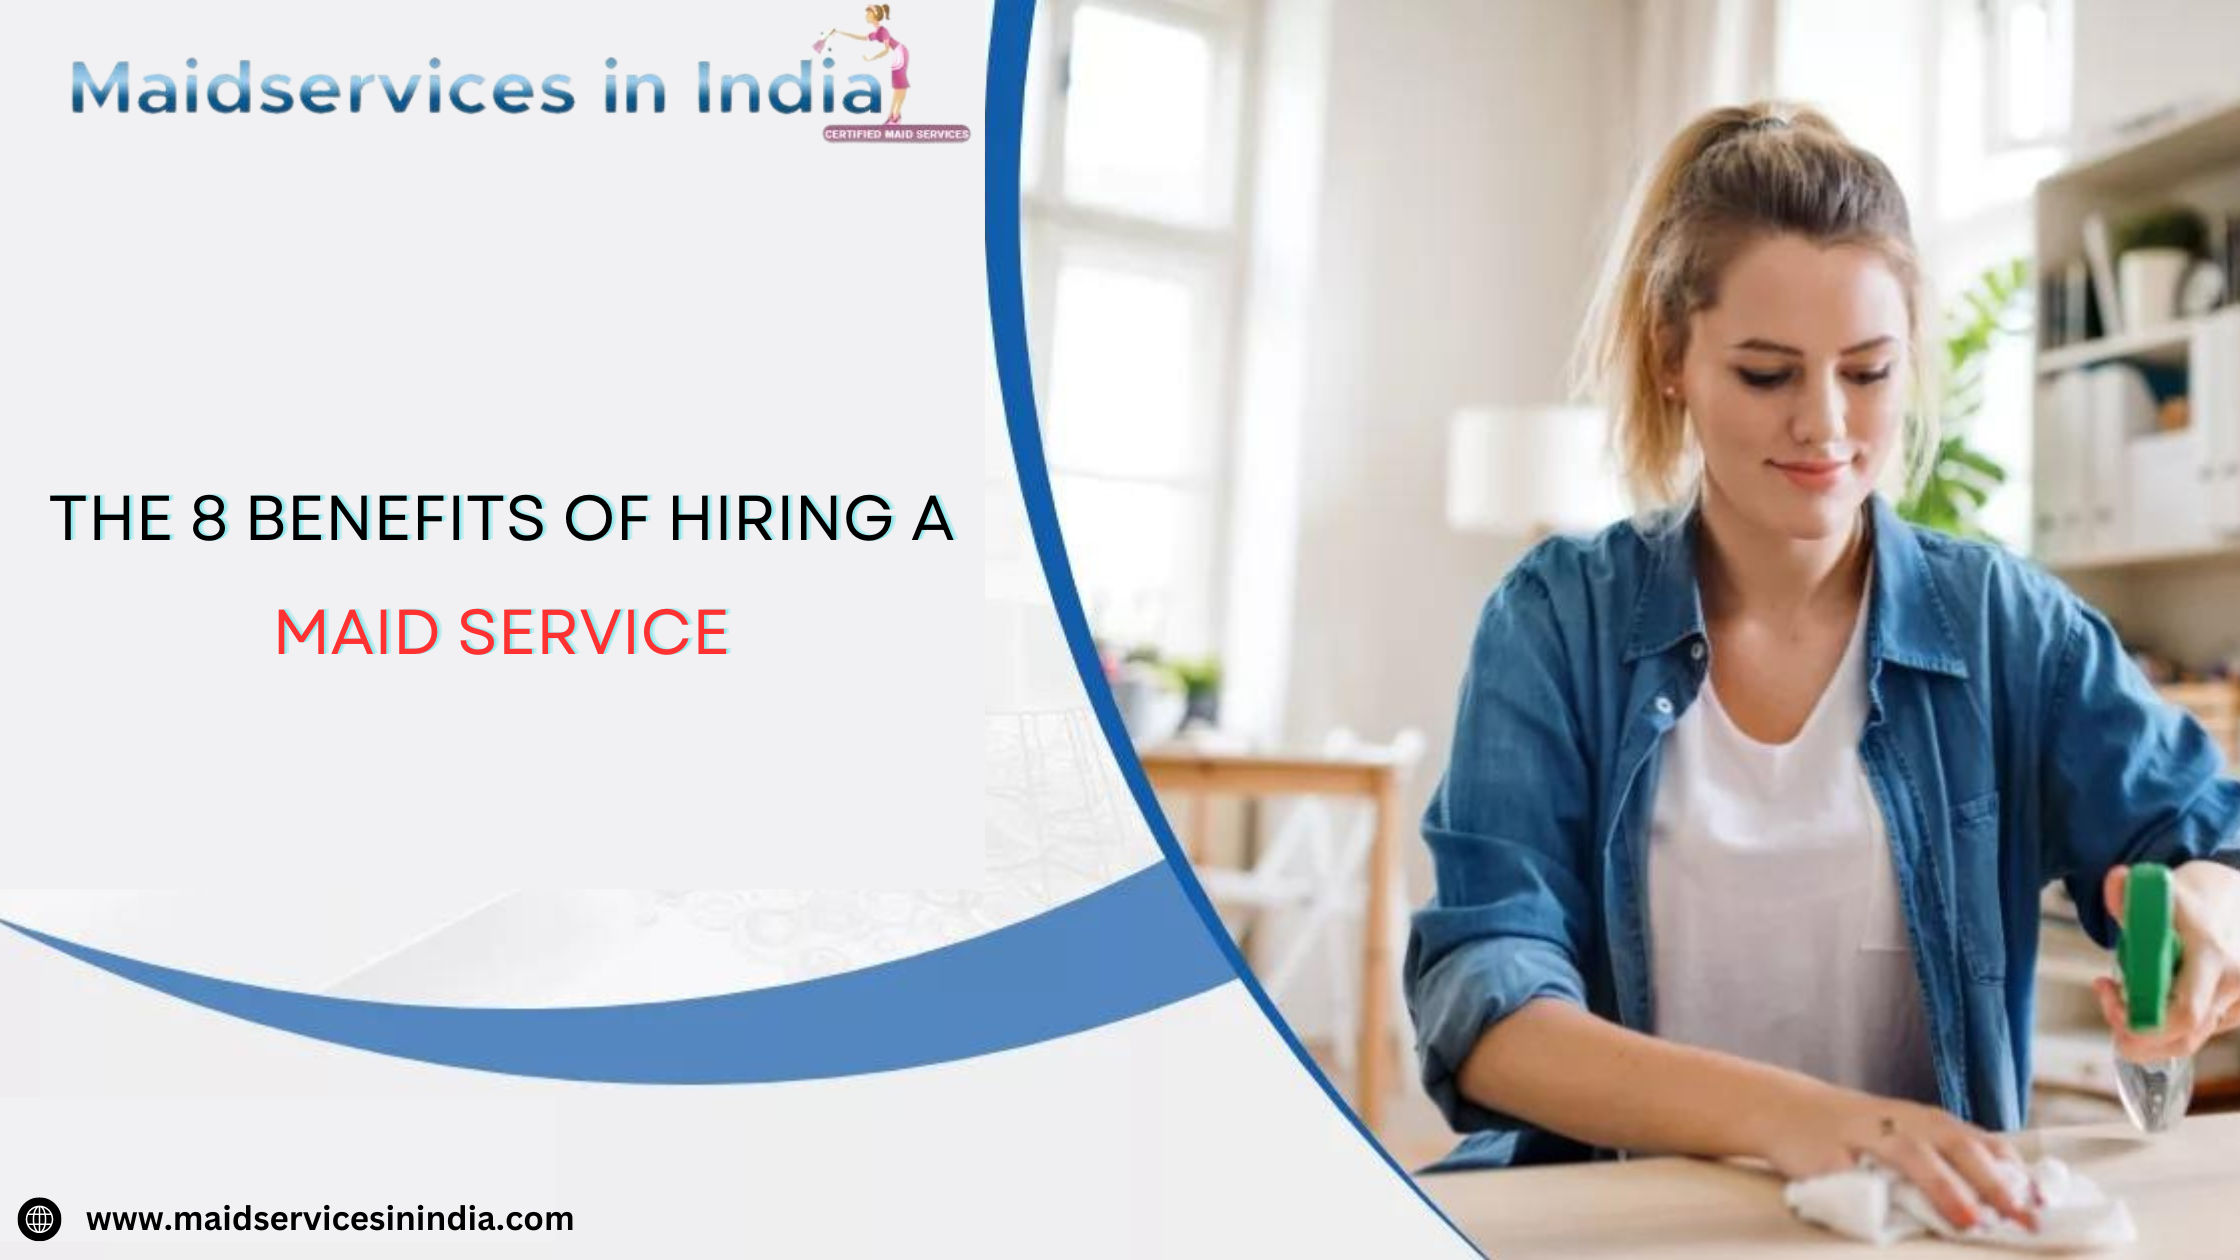 Juggling work, family, and personal life can be overwhelming, leaving little time for household chores. This is where a professional maid service can make a significant difference.